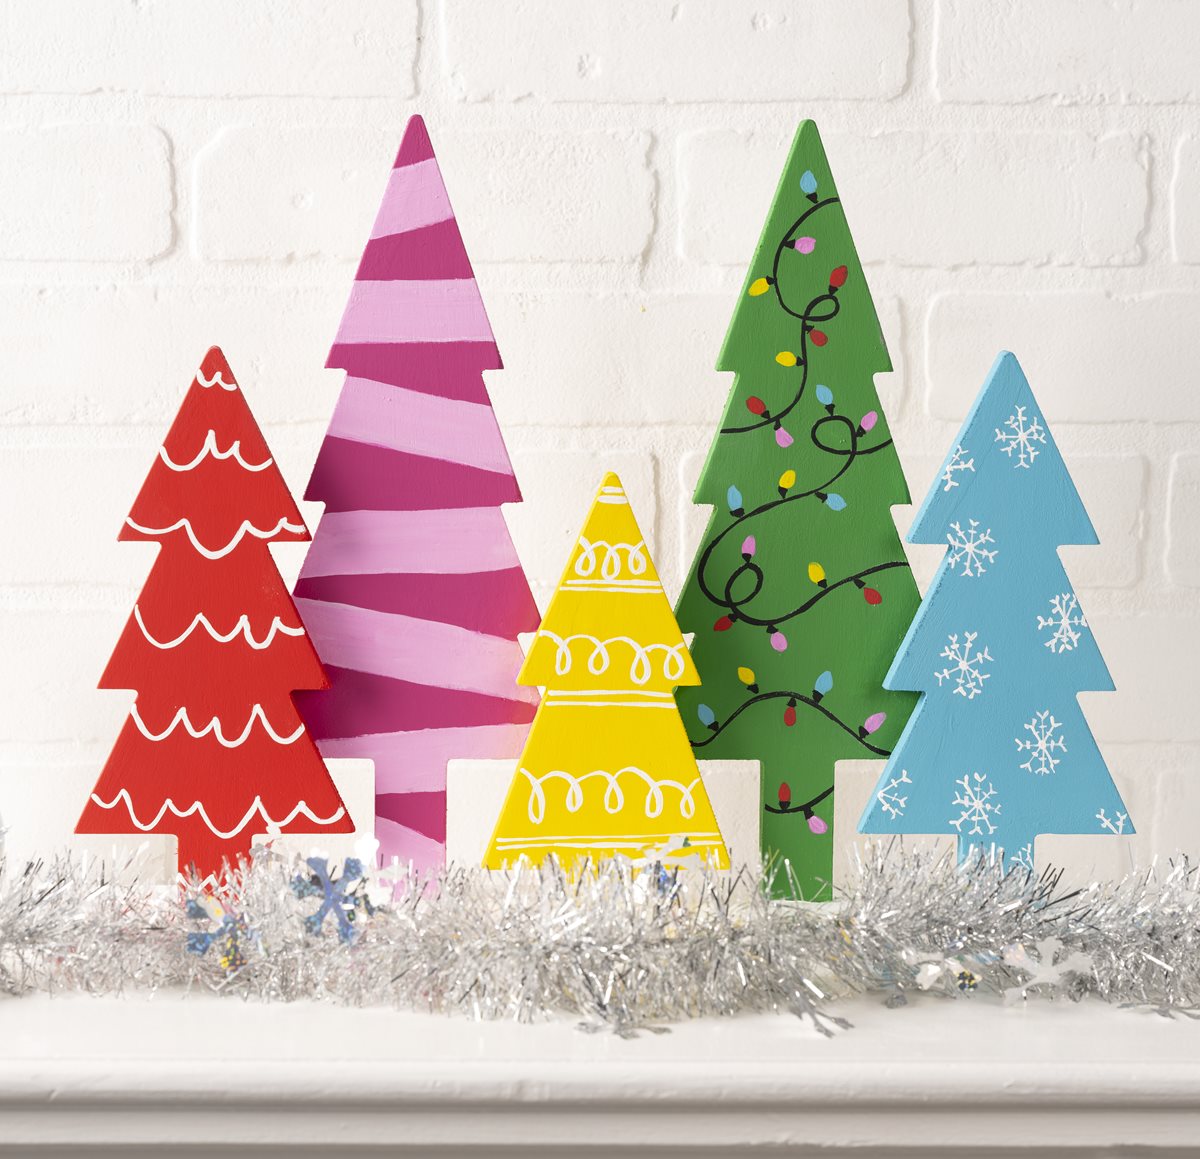 https://plaidonline.com/getattachment/Projects/Colorful-Wooden-Christmas-Tree-Sign/056954_PL_SUR_bty_Trees_03_A_082021.jpg;